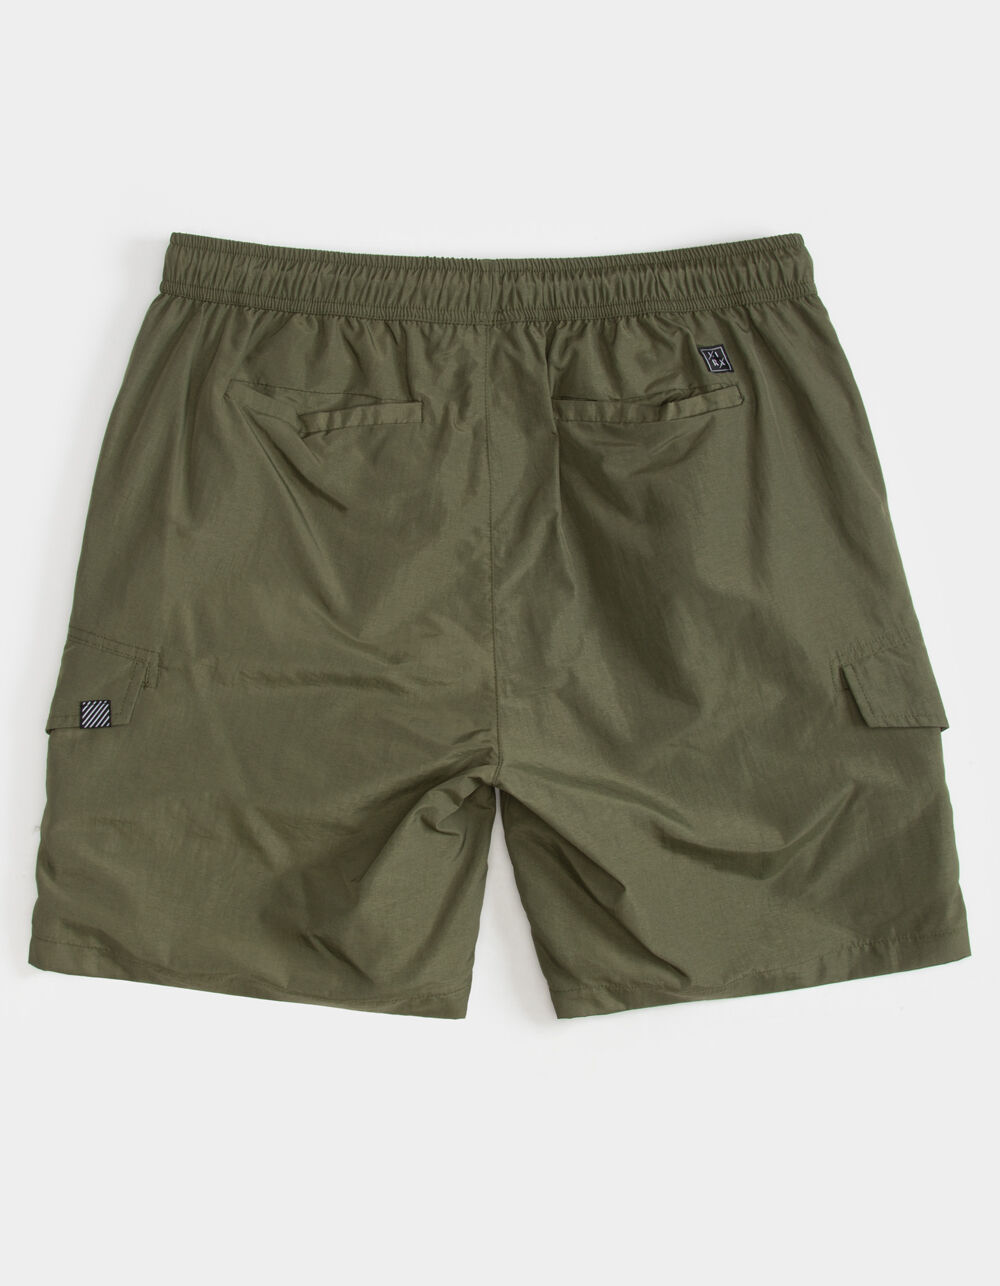 LIRA x Double Bogey Club Bunker Mens Volley Shorts - MILITARY | Tillys